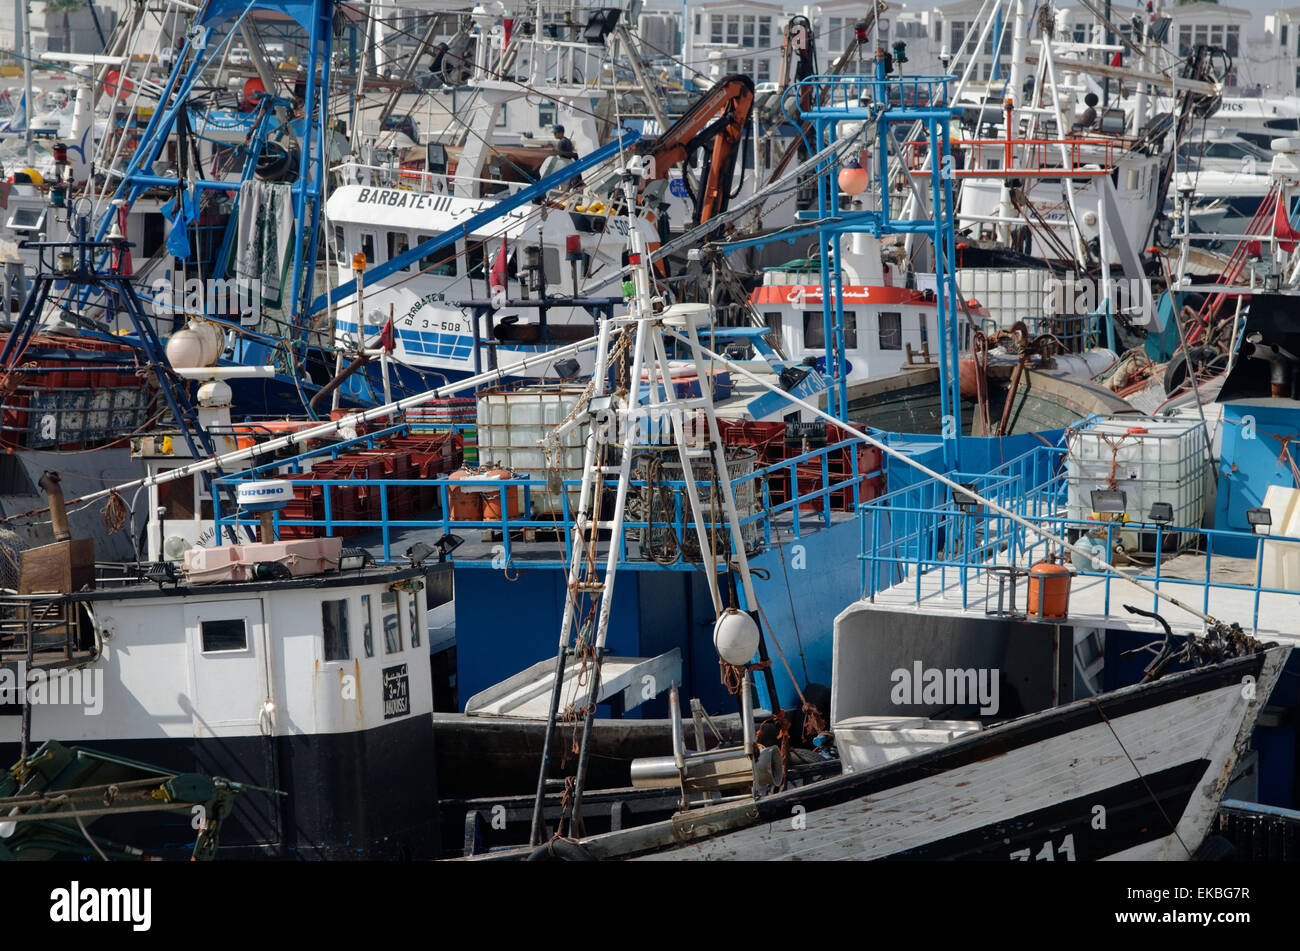 Densely crowded fishing boats moored in Tangier fishing harbour, Tangier, Morocco, North Africa, Africa Stock Photo